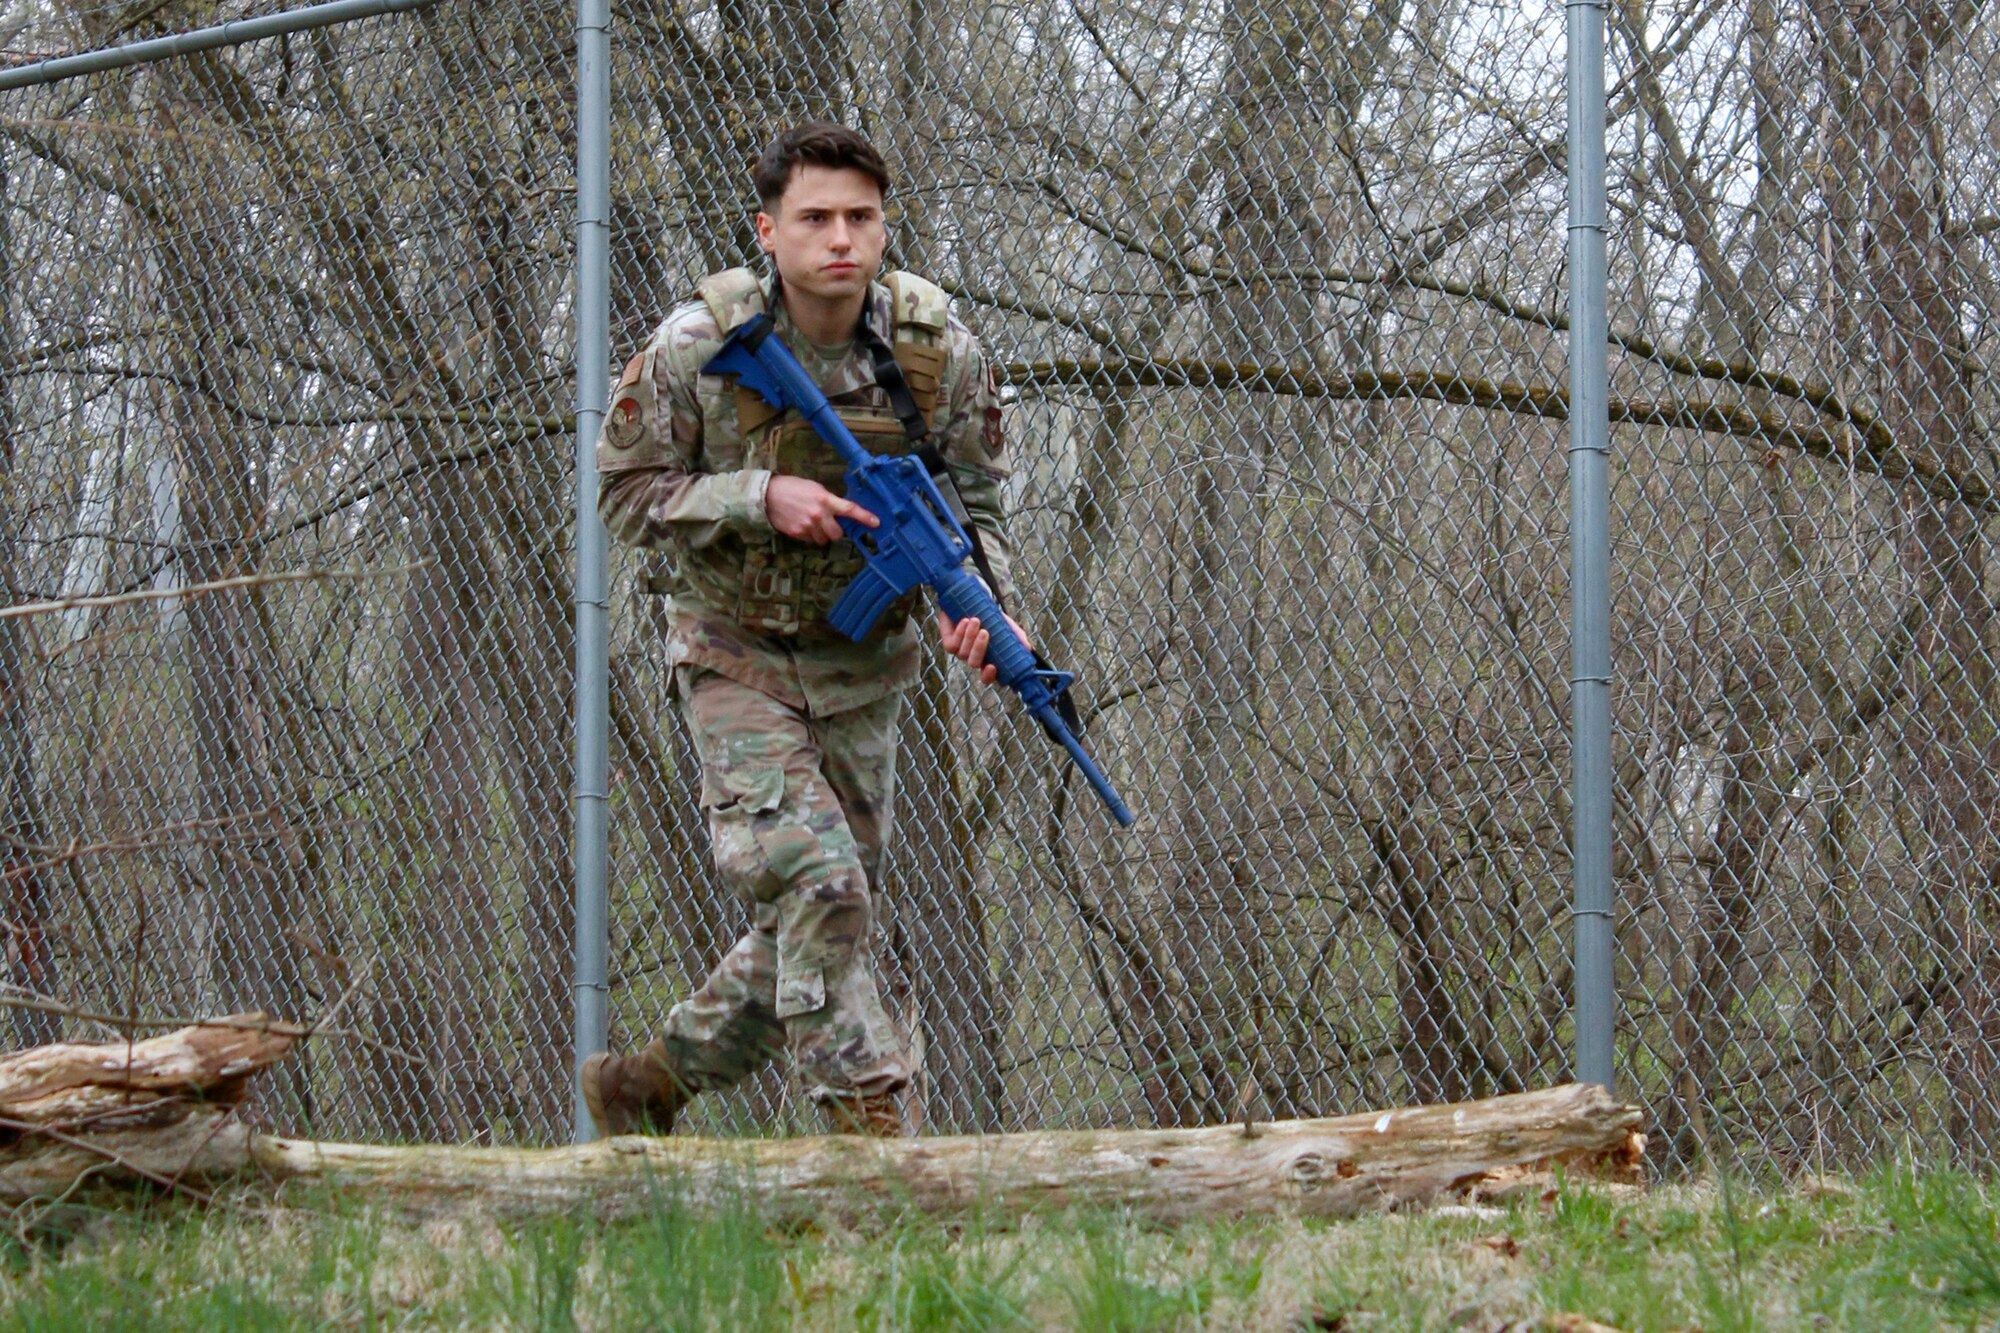 Senior Airman Bristan Guza, a defender from the 445th Security Forces Squadron, skirts a fence line while leading a fire team during field movement training on April 2, 2023. Despite the wet and cold weather, defenders from the 445th practiced skill such as maneuvers, fire teams, formations, cover and concealment, and critical thinking.